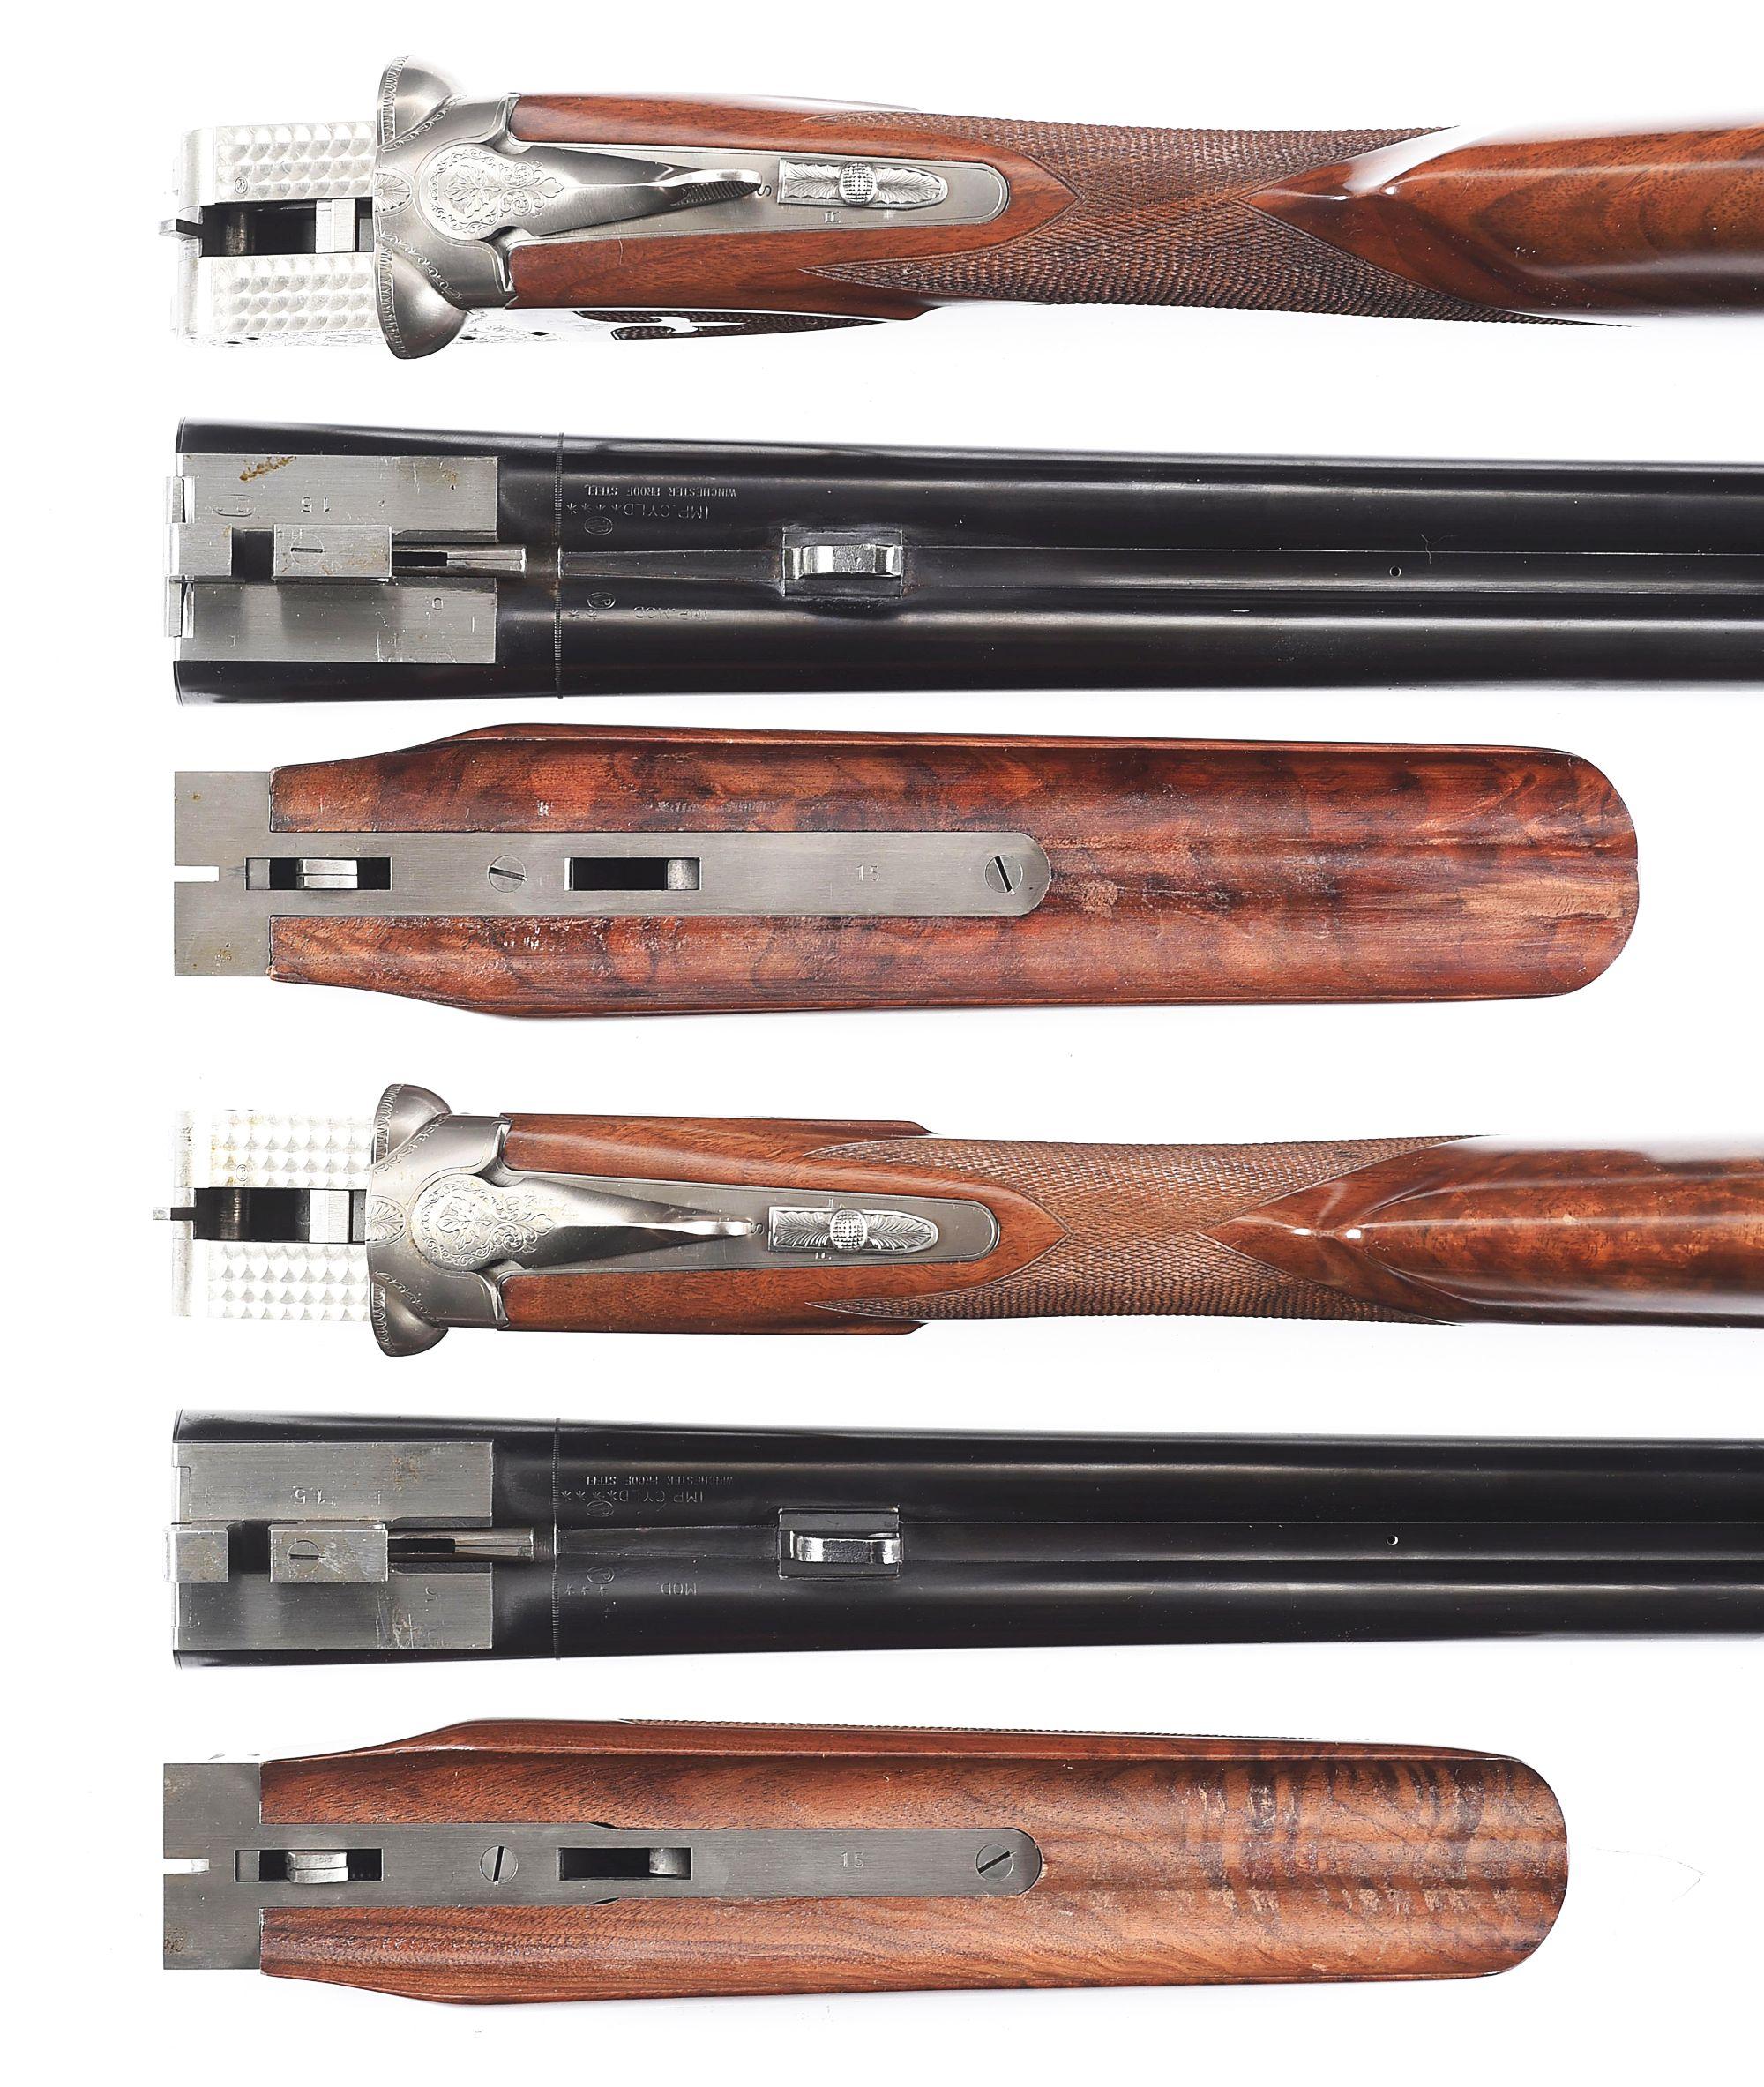 (M) CASED PAIR OF WINCHESTER MODEL 23 GRANDE CANADIAN SIDE BY SIDE SHOTGUNS IN 12 AND 20.